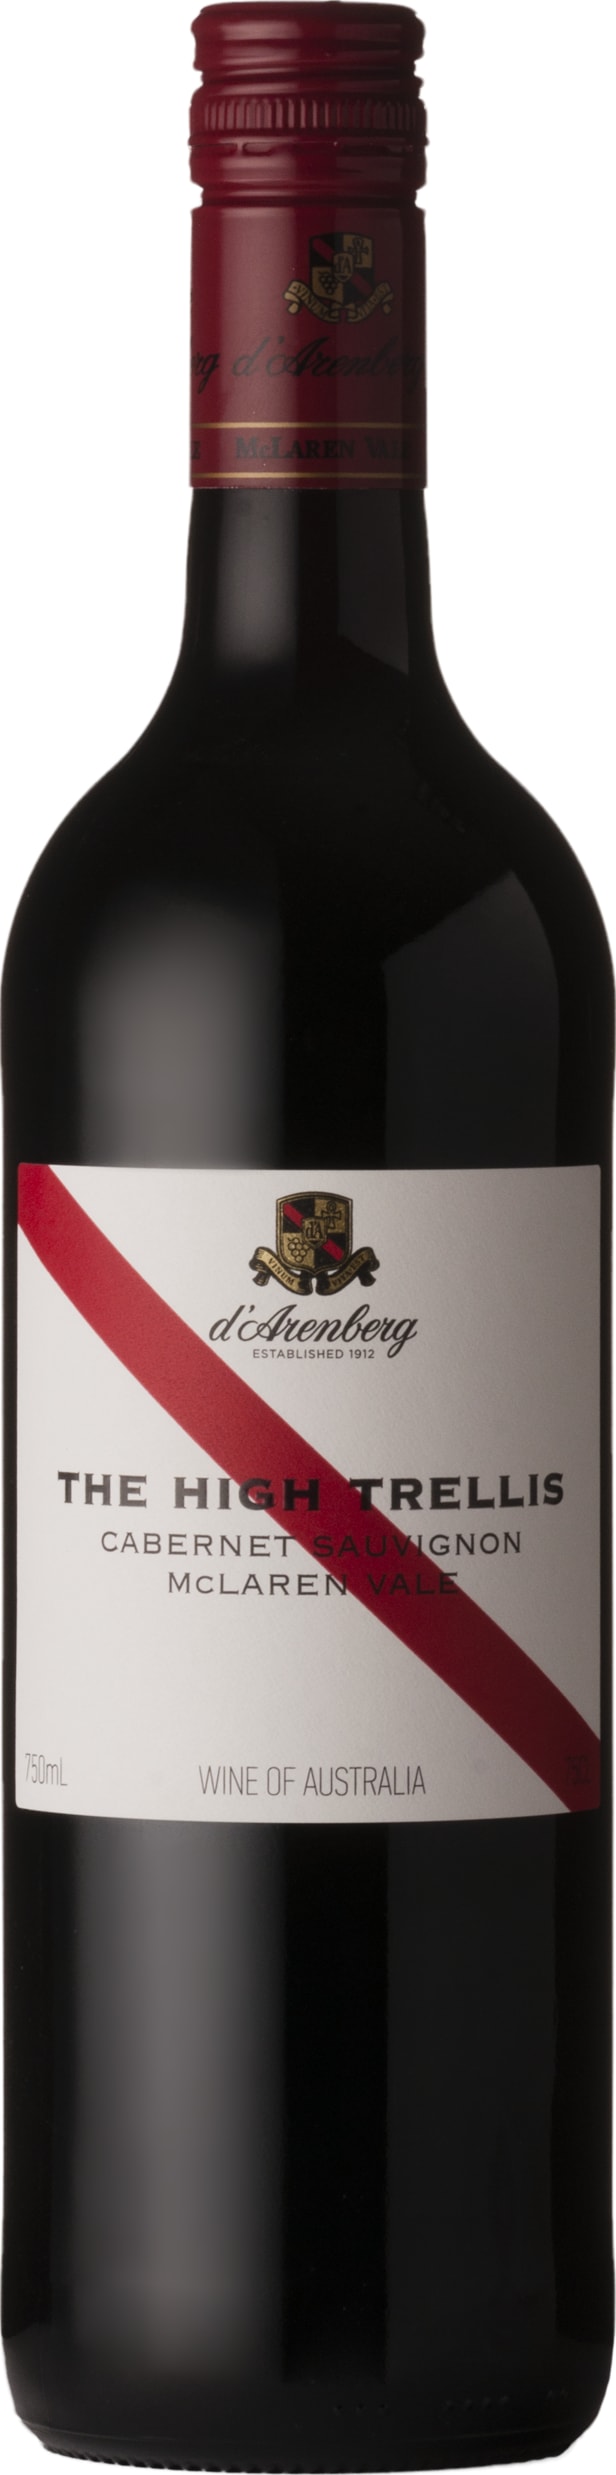 D Arenberg The High Trellis Cabernet Sauvignon 2019 75cl - Buy D Arenberg Wines from GREAT WINES DIRECT wine shop